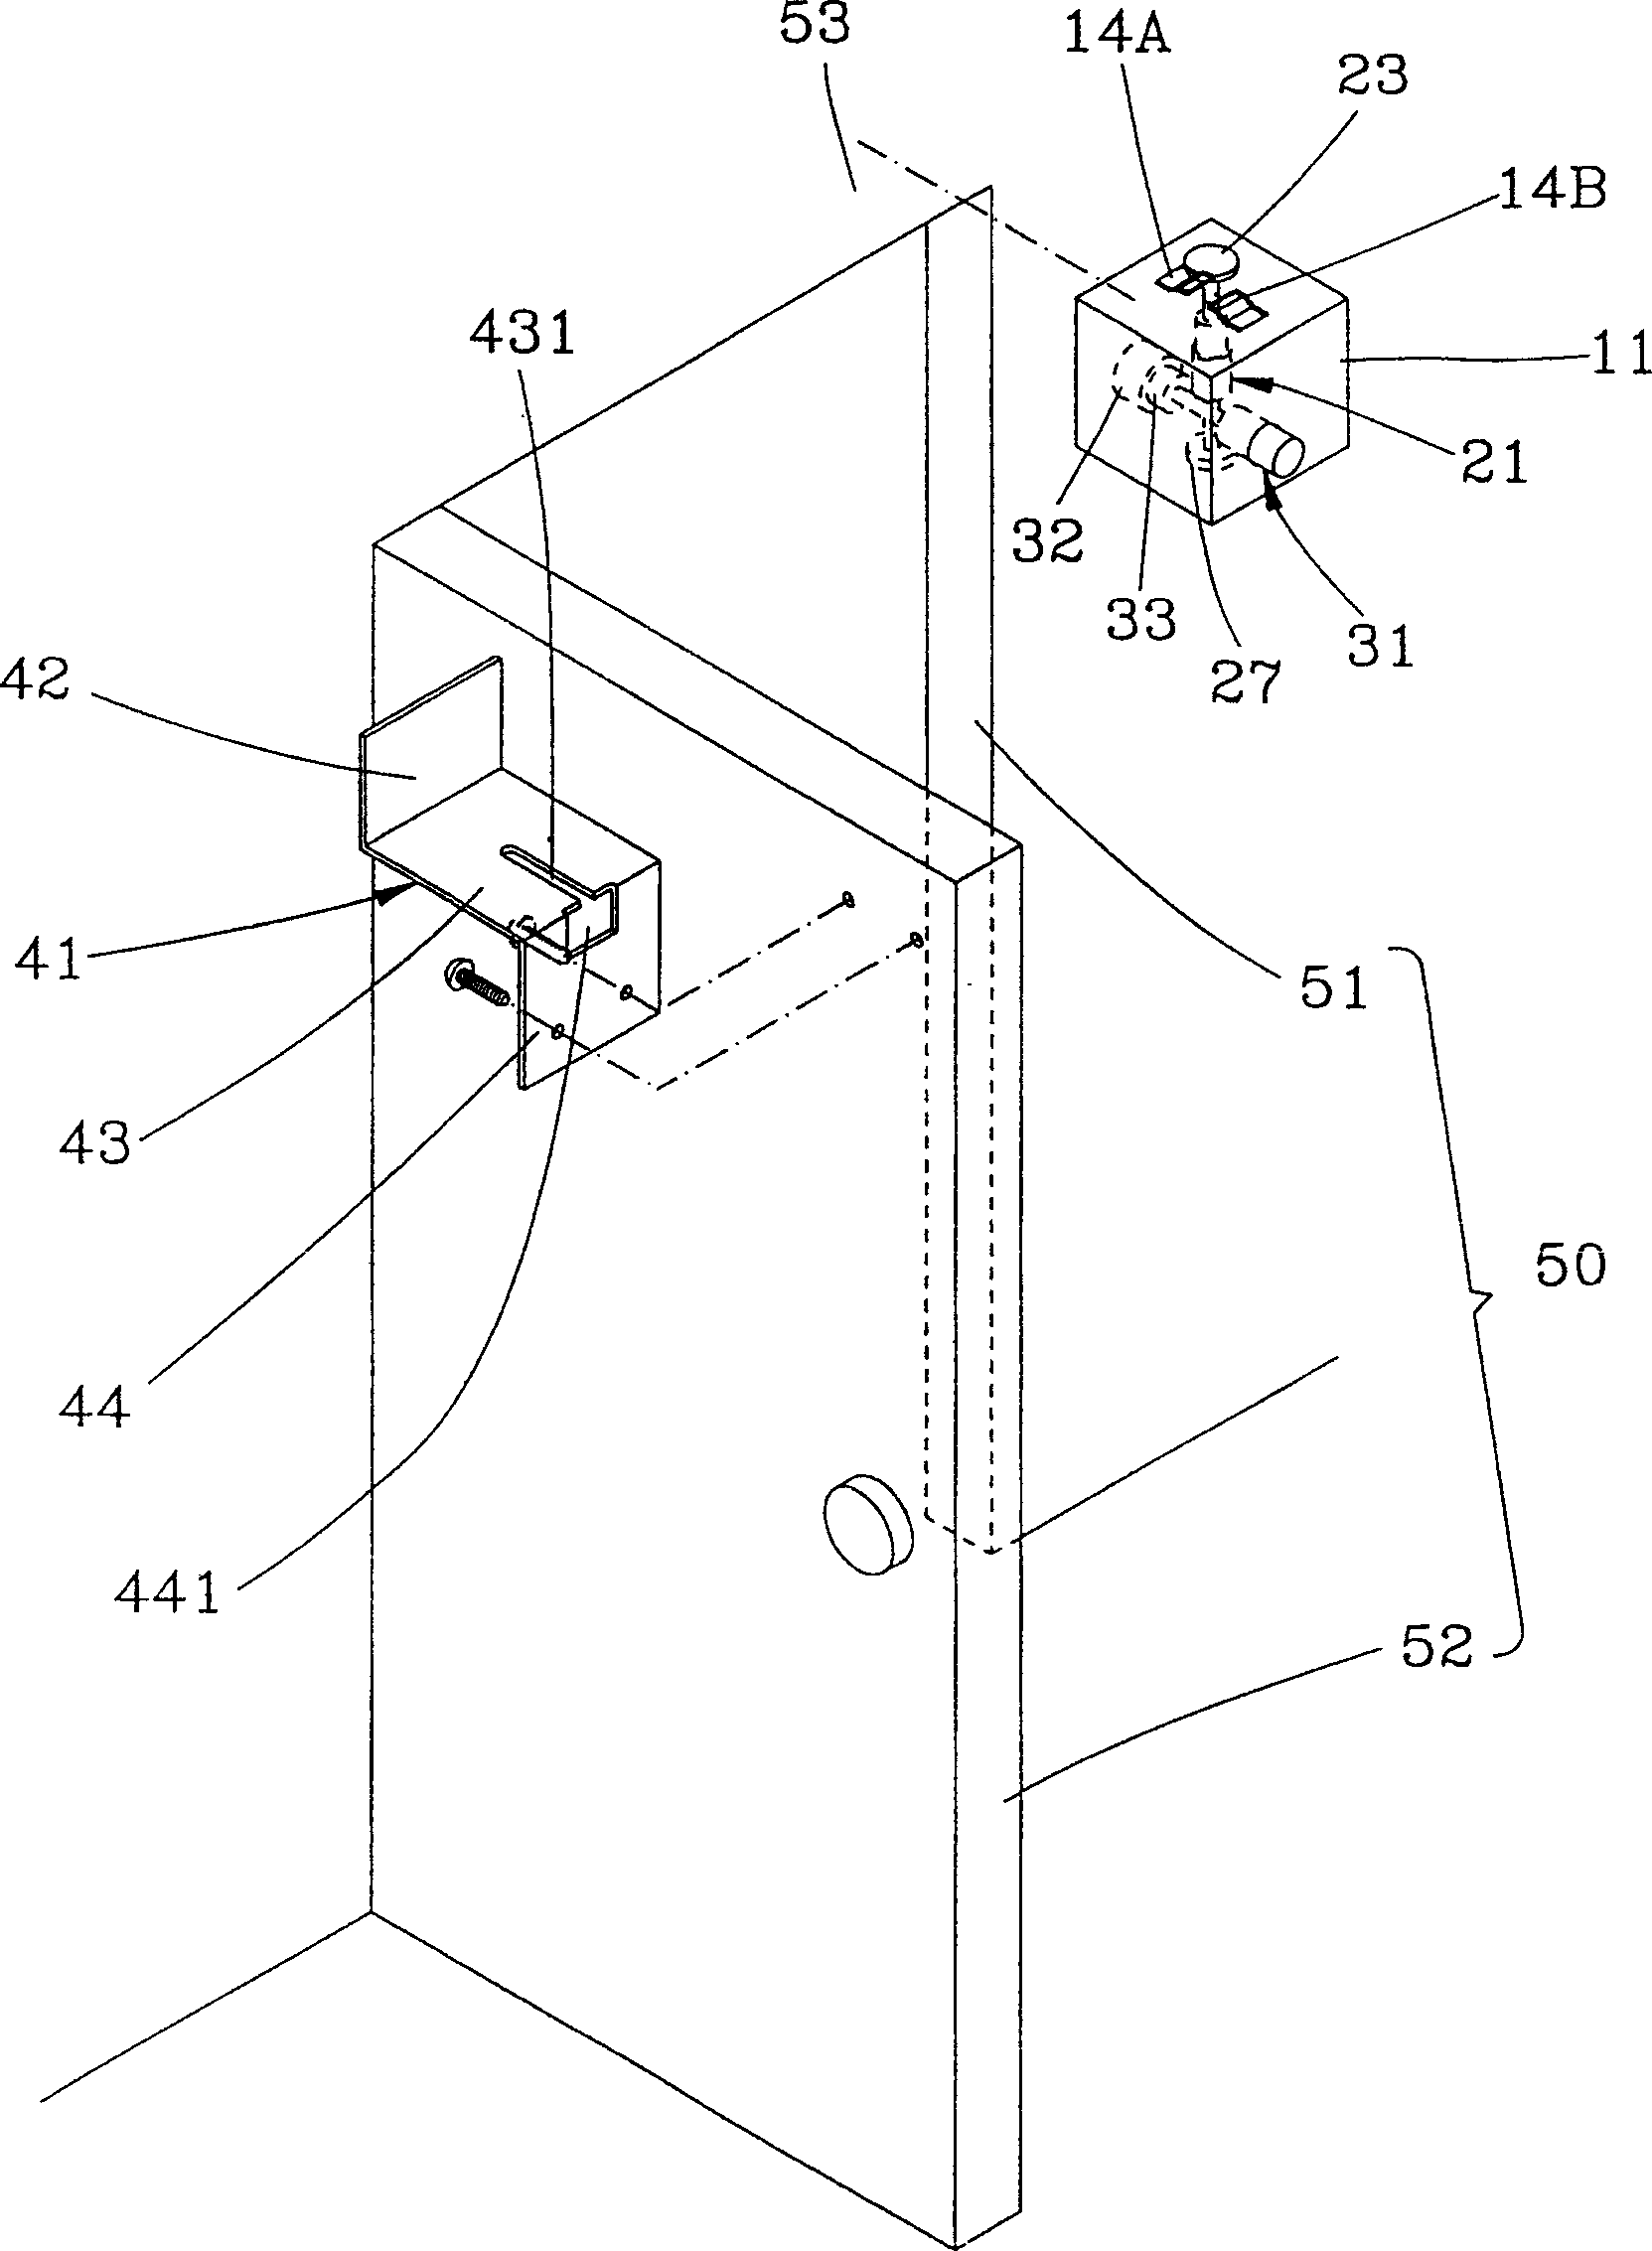 Mechanical linkage device for conducting valve